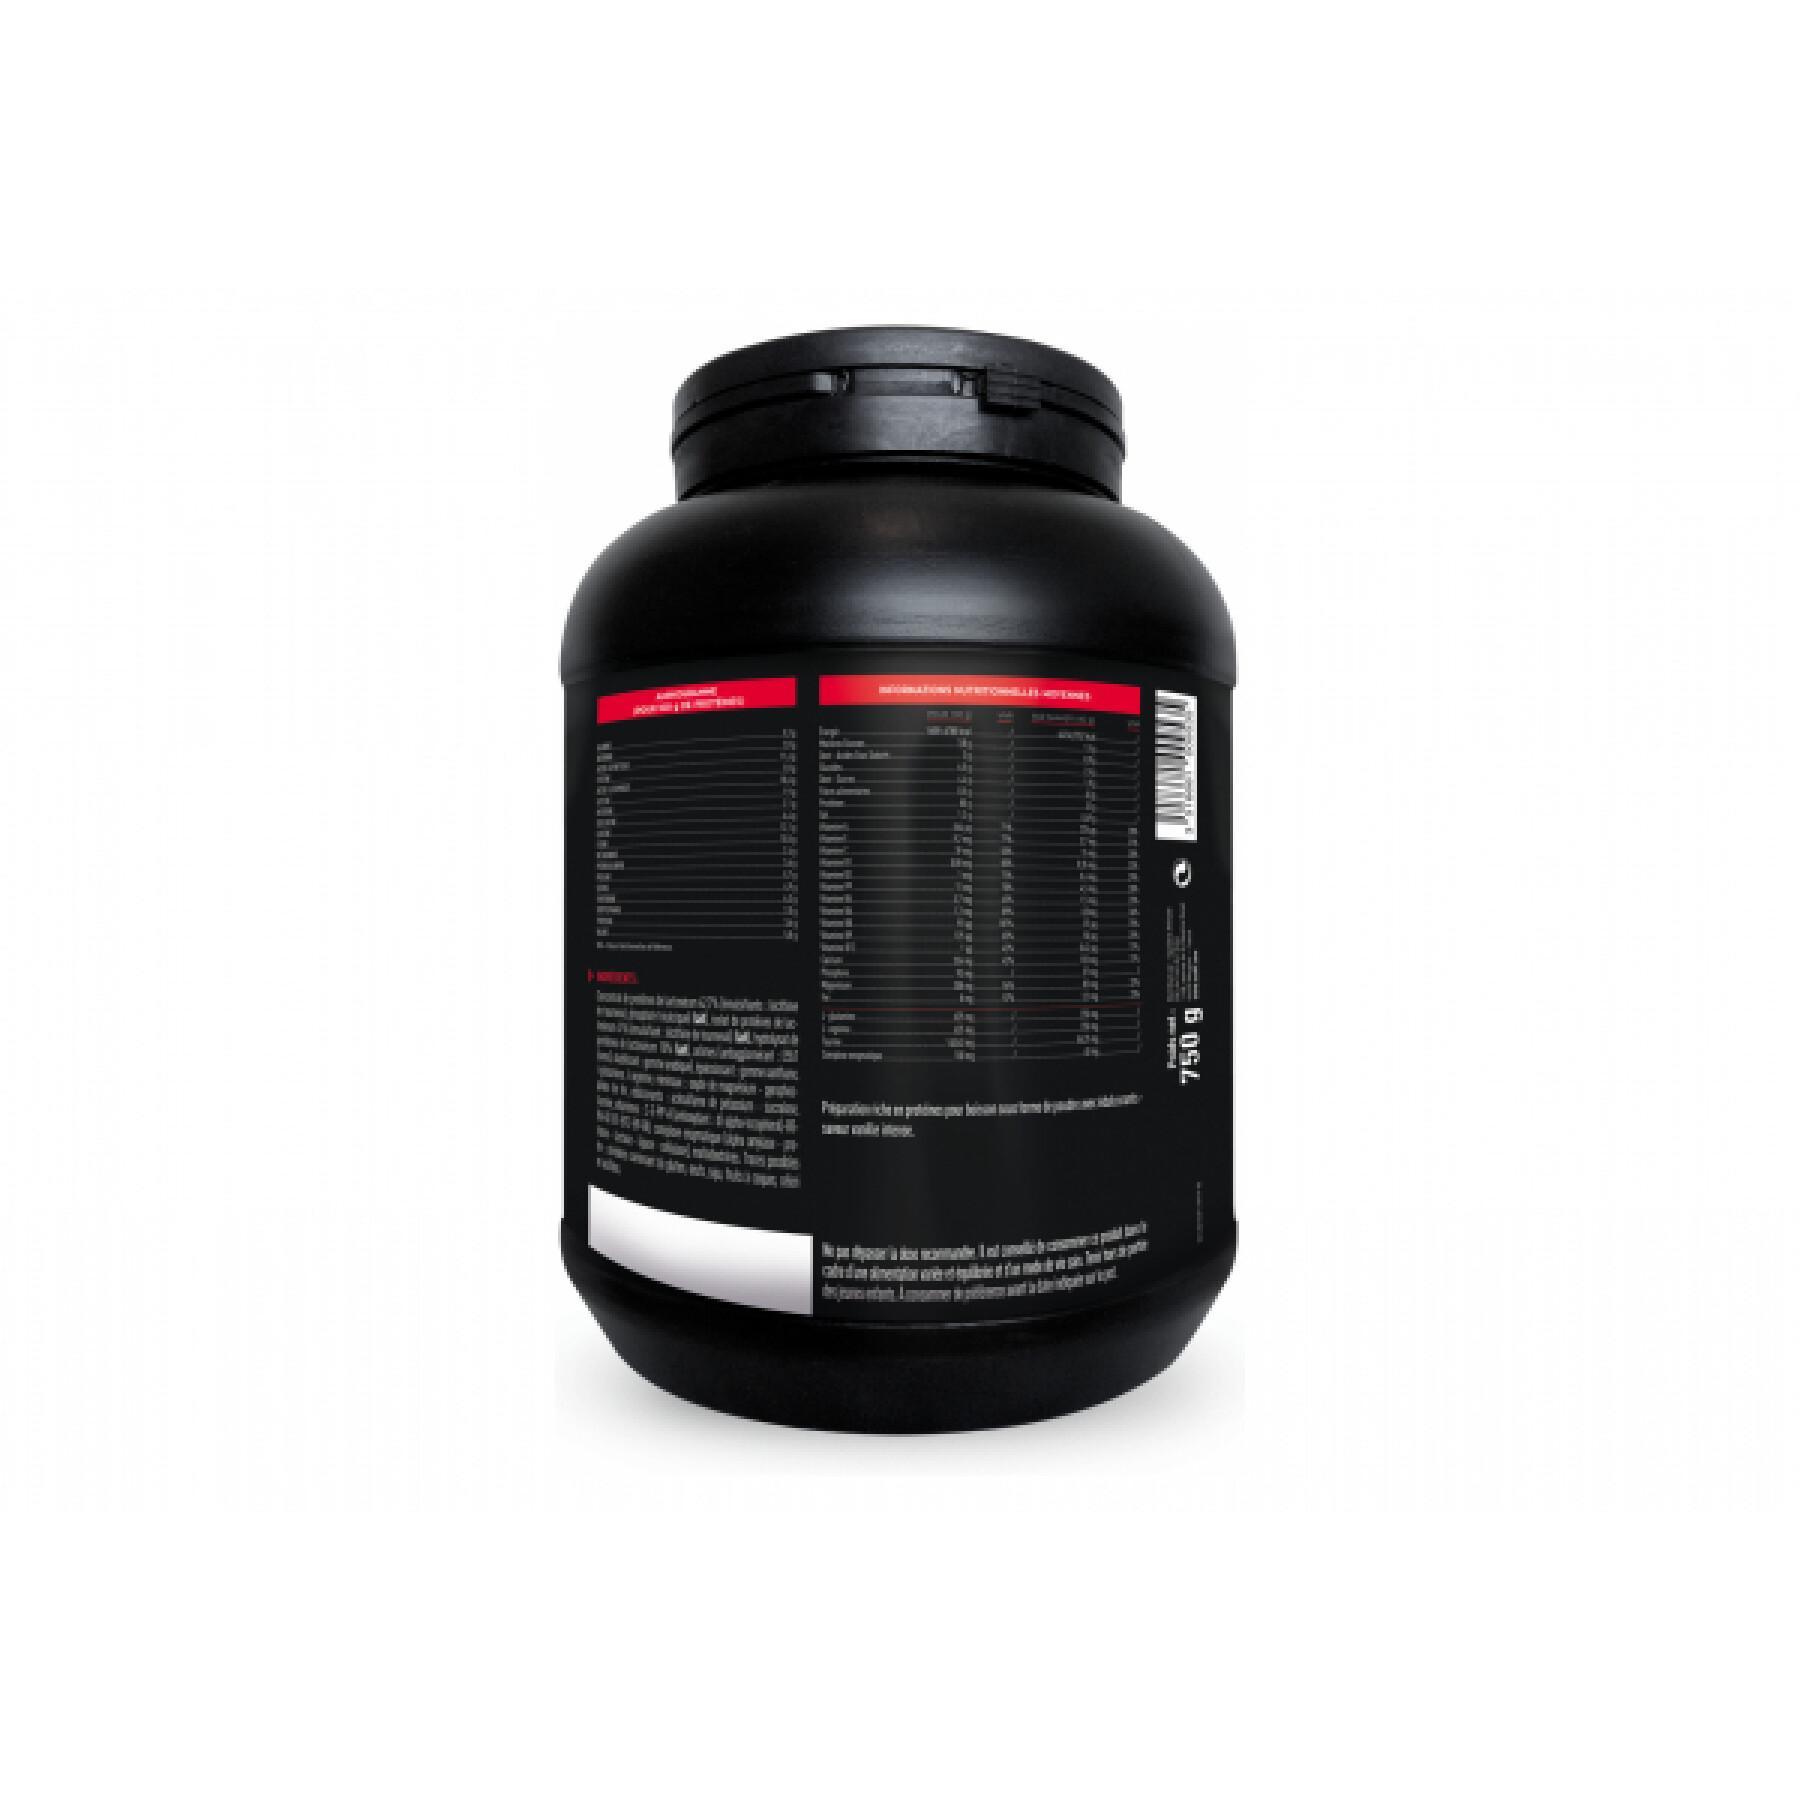 Pure Whey vanille intense EA Fit